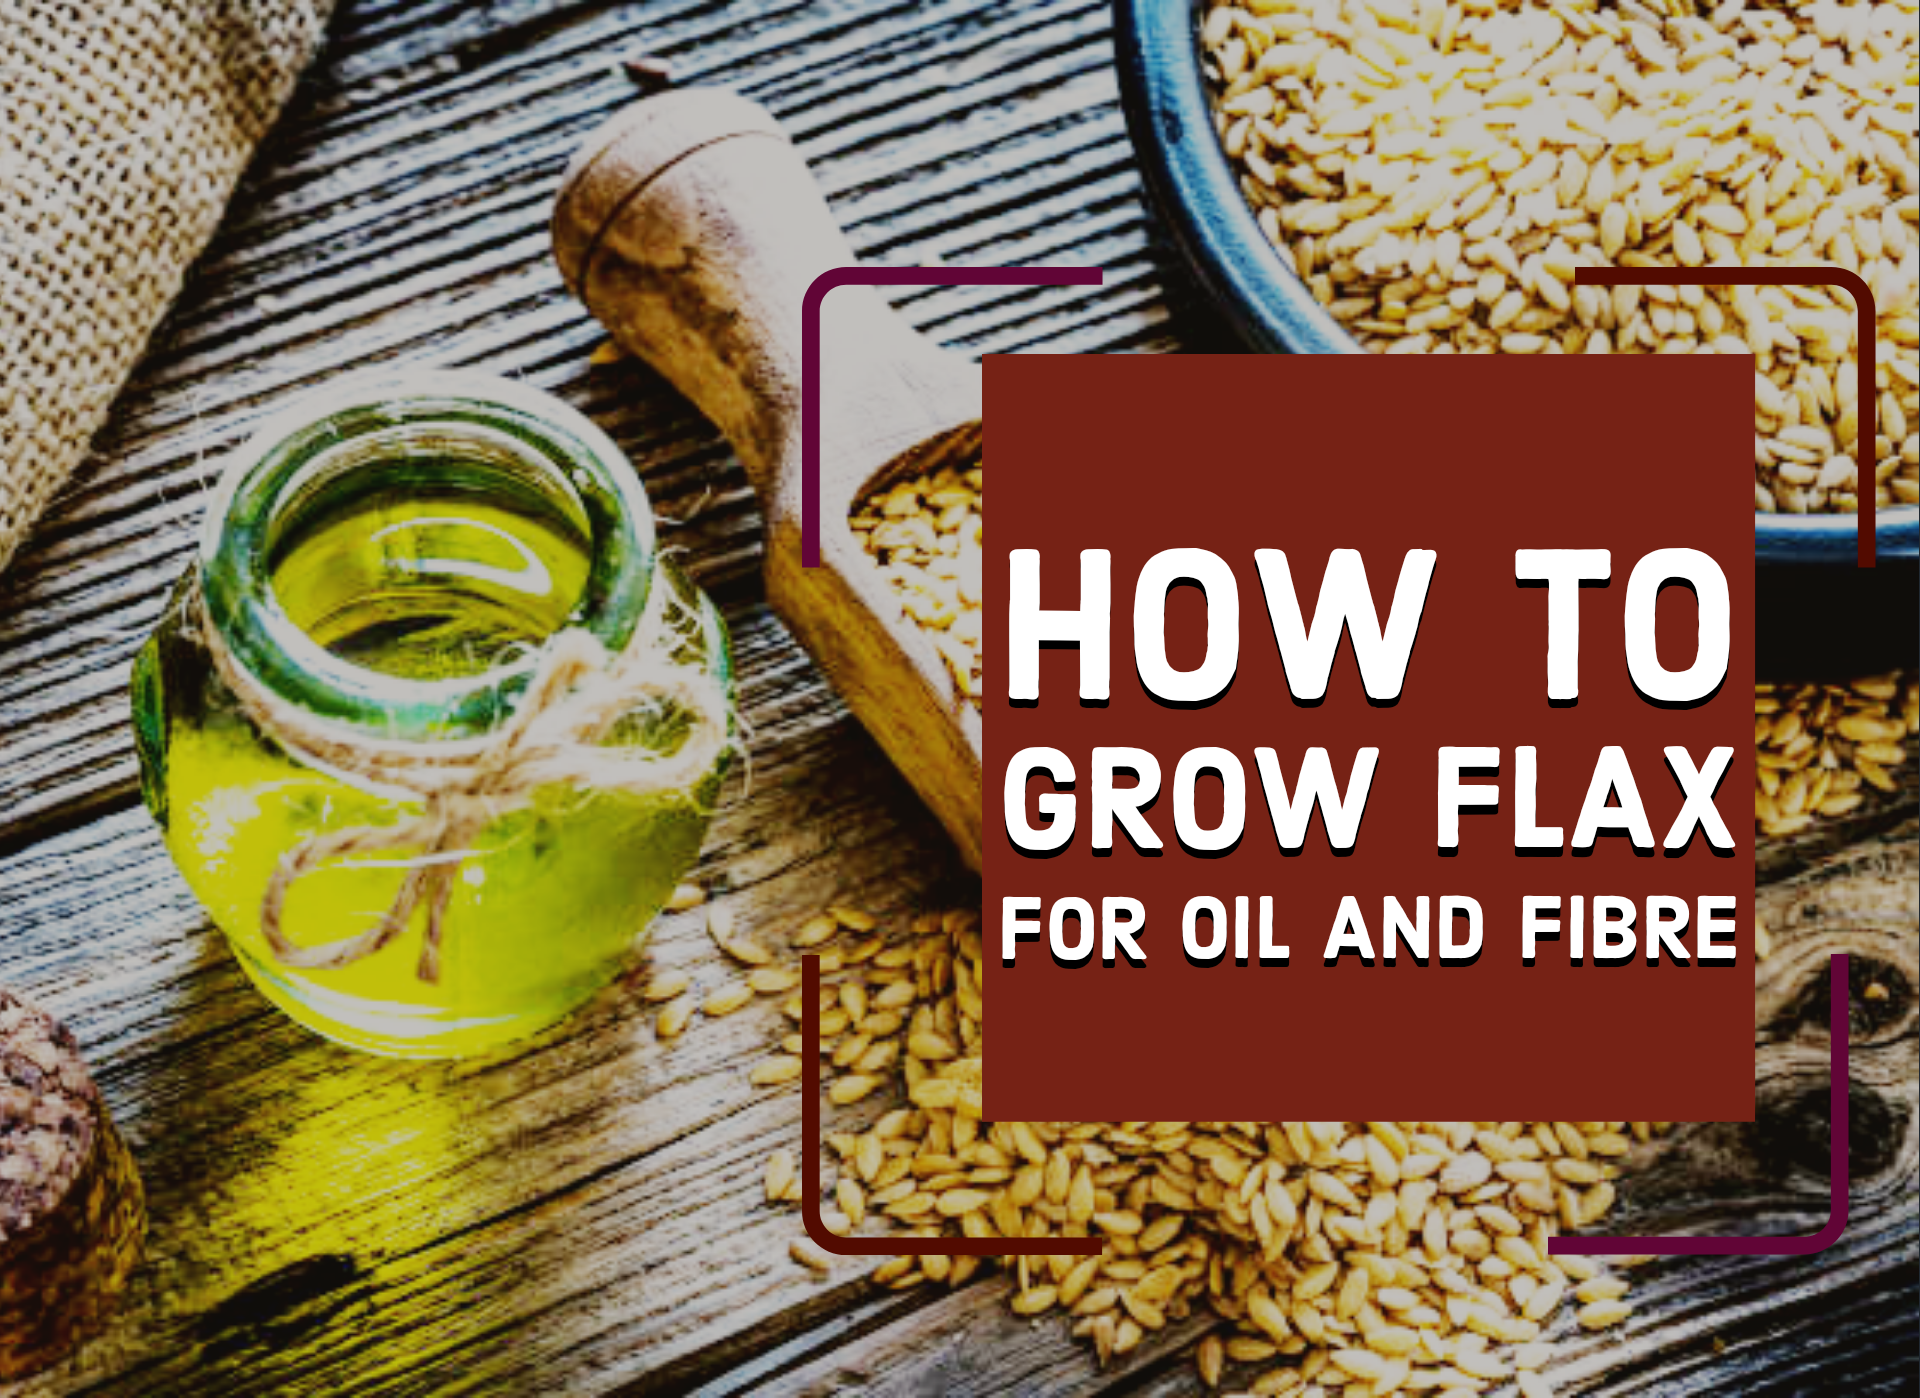 How to grow flax for oil and fibre